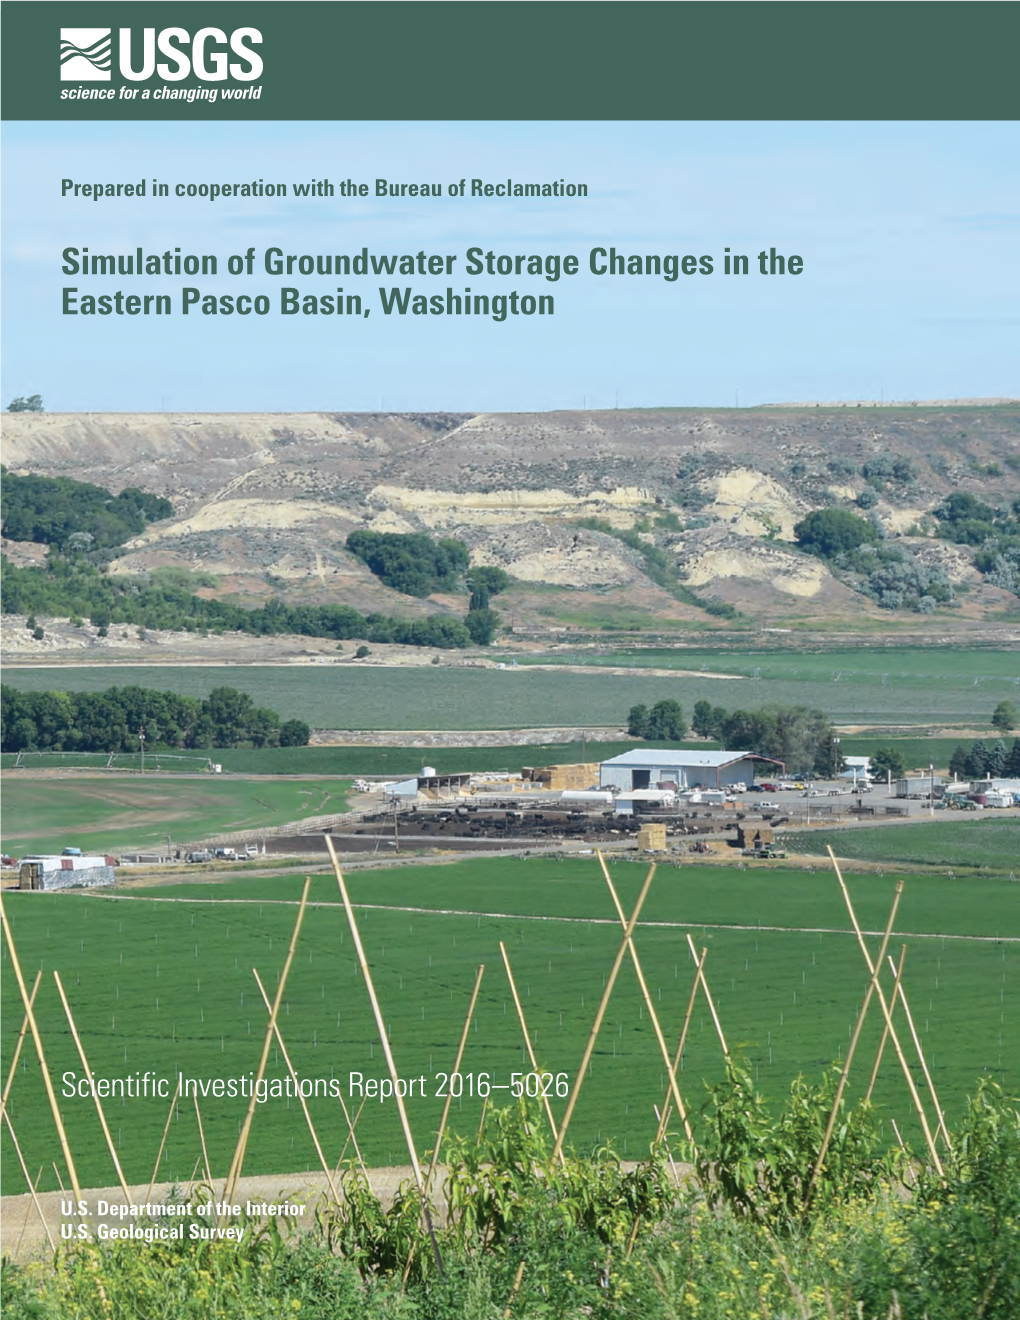 Simulation of Groundwater Storage Changes in the Eastern Pasco Basin, Washington